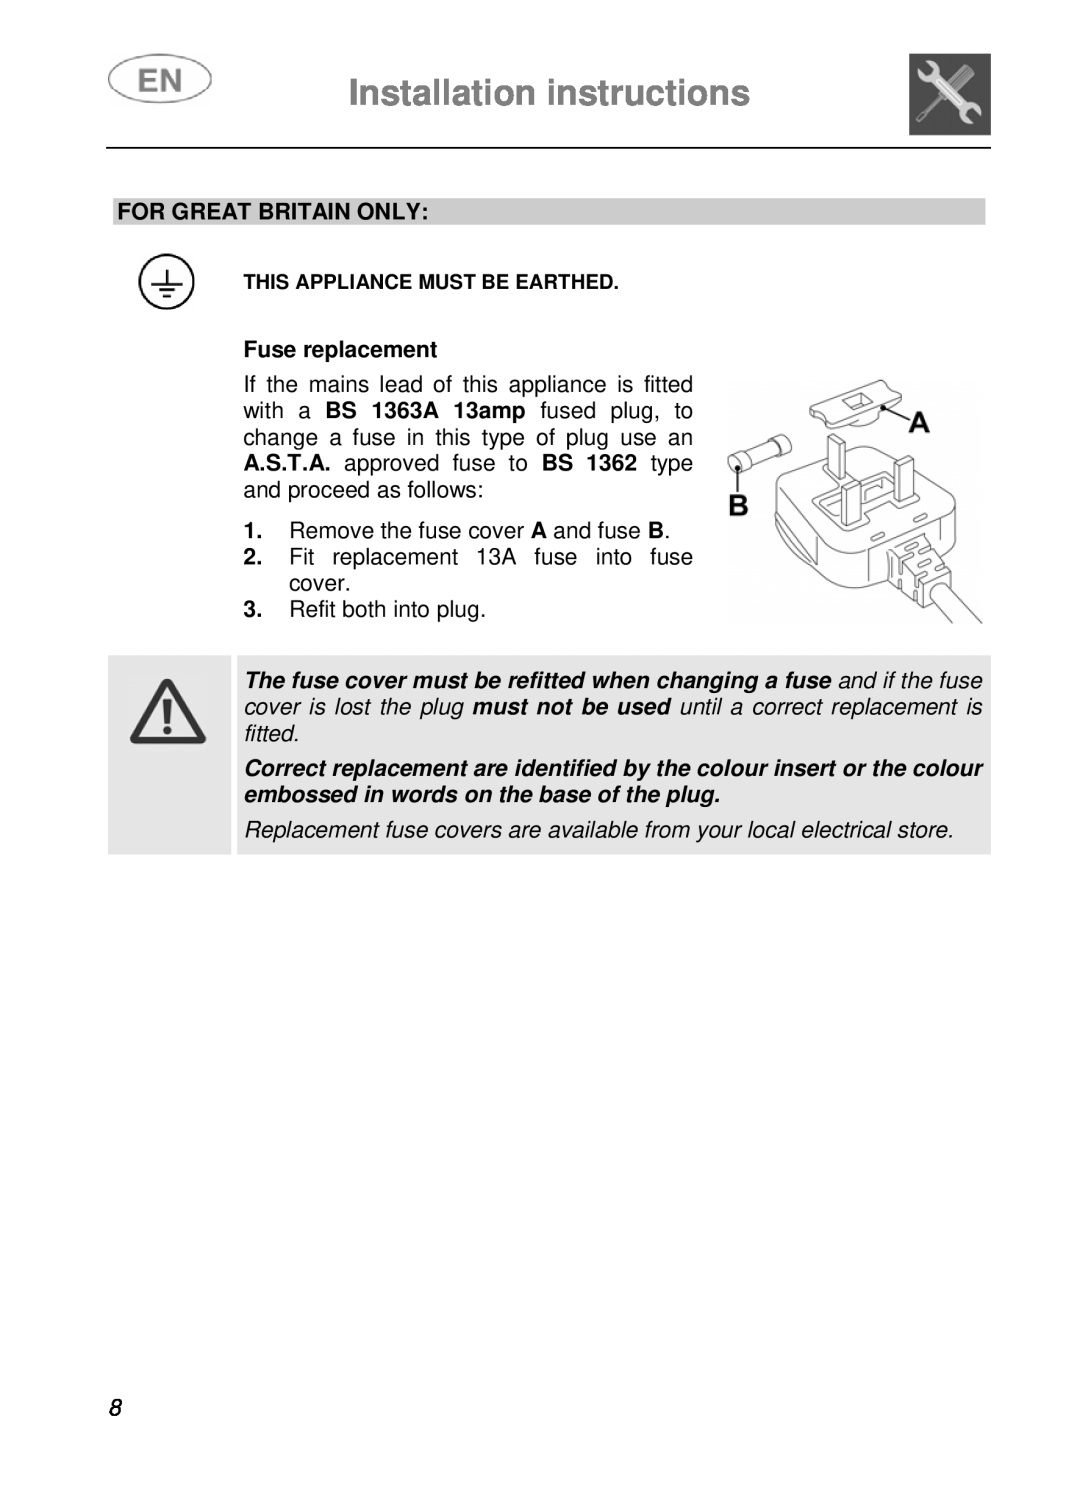 Smeg LVS1449B instruction manual Installation instructions, For Great Britain Only, Fuse replacement 